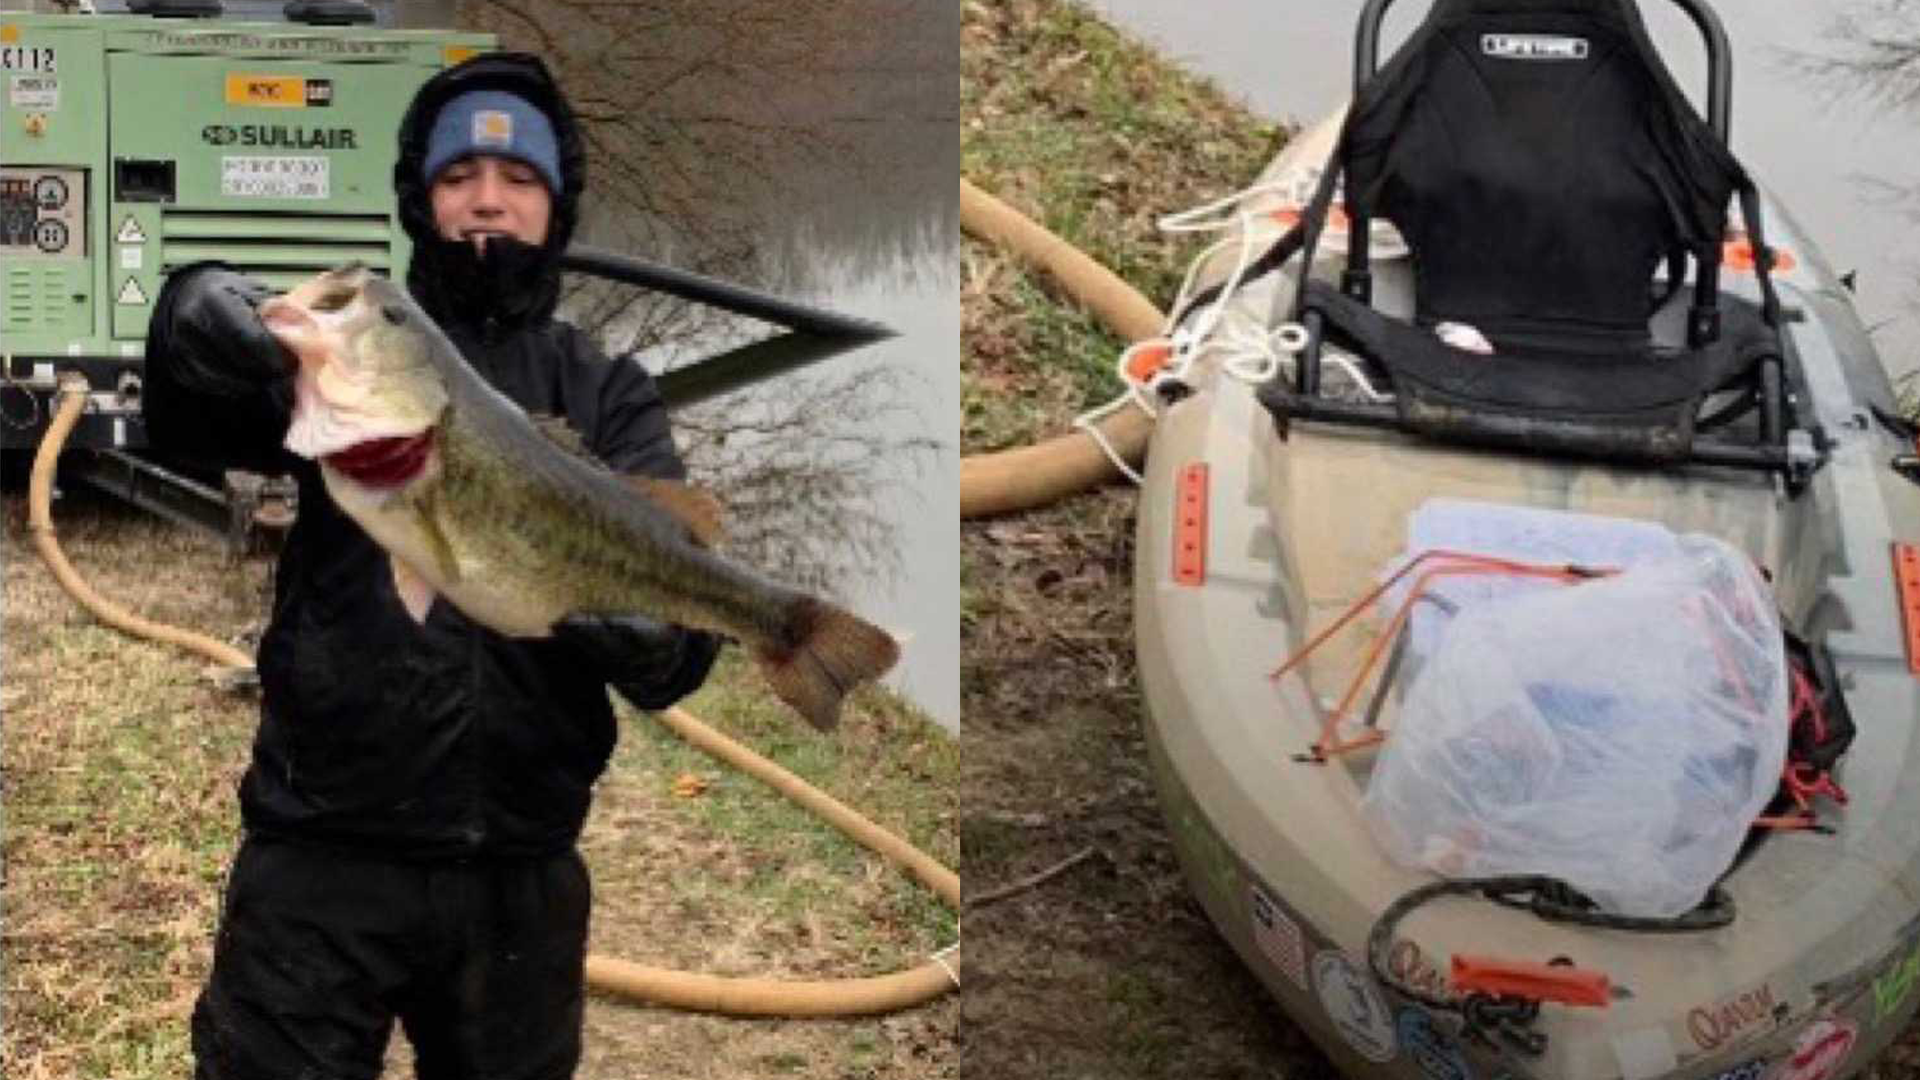 On Jan. 10, Jake Stover put his kayak in the water at Cox Park in Louisville for the first and last time. Now his story is highlighting the Ohio River's deception.